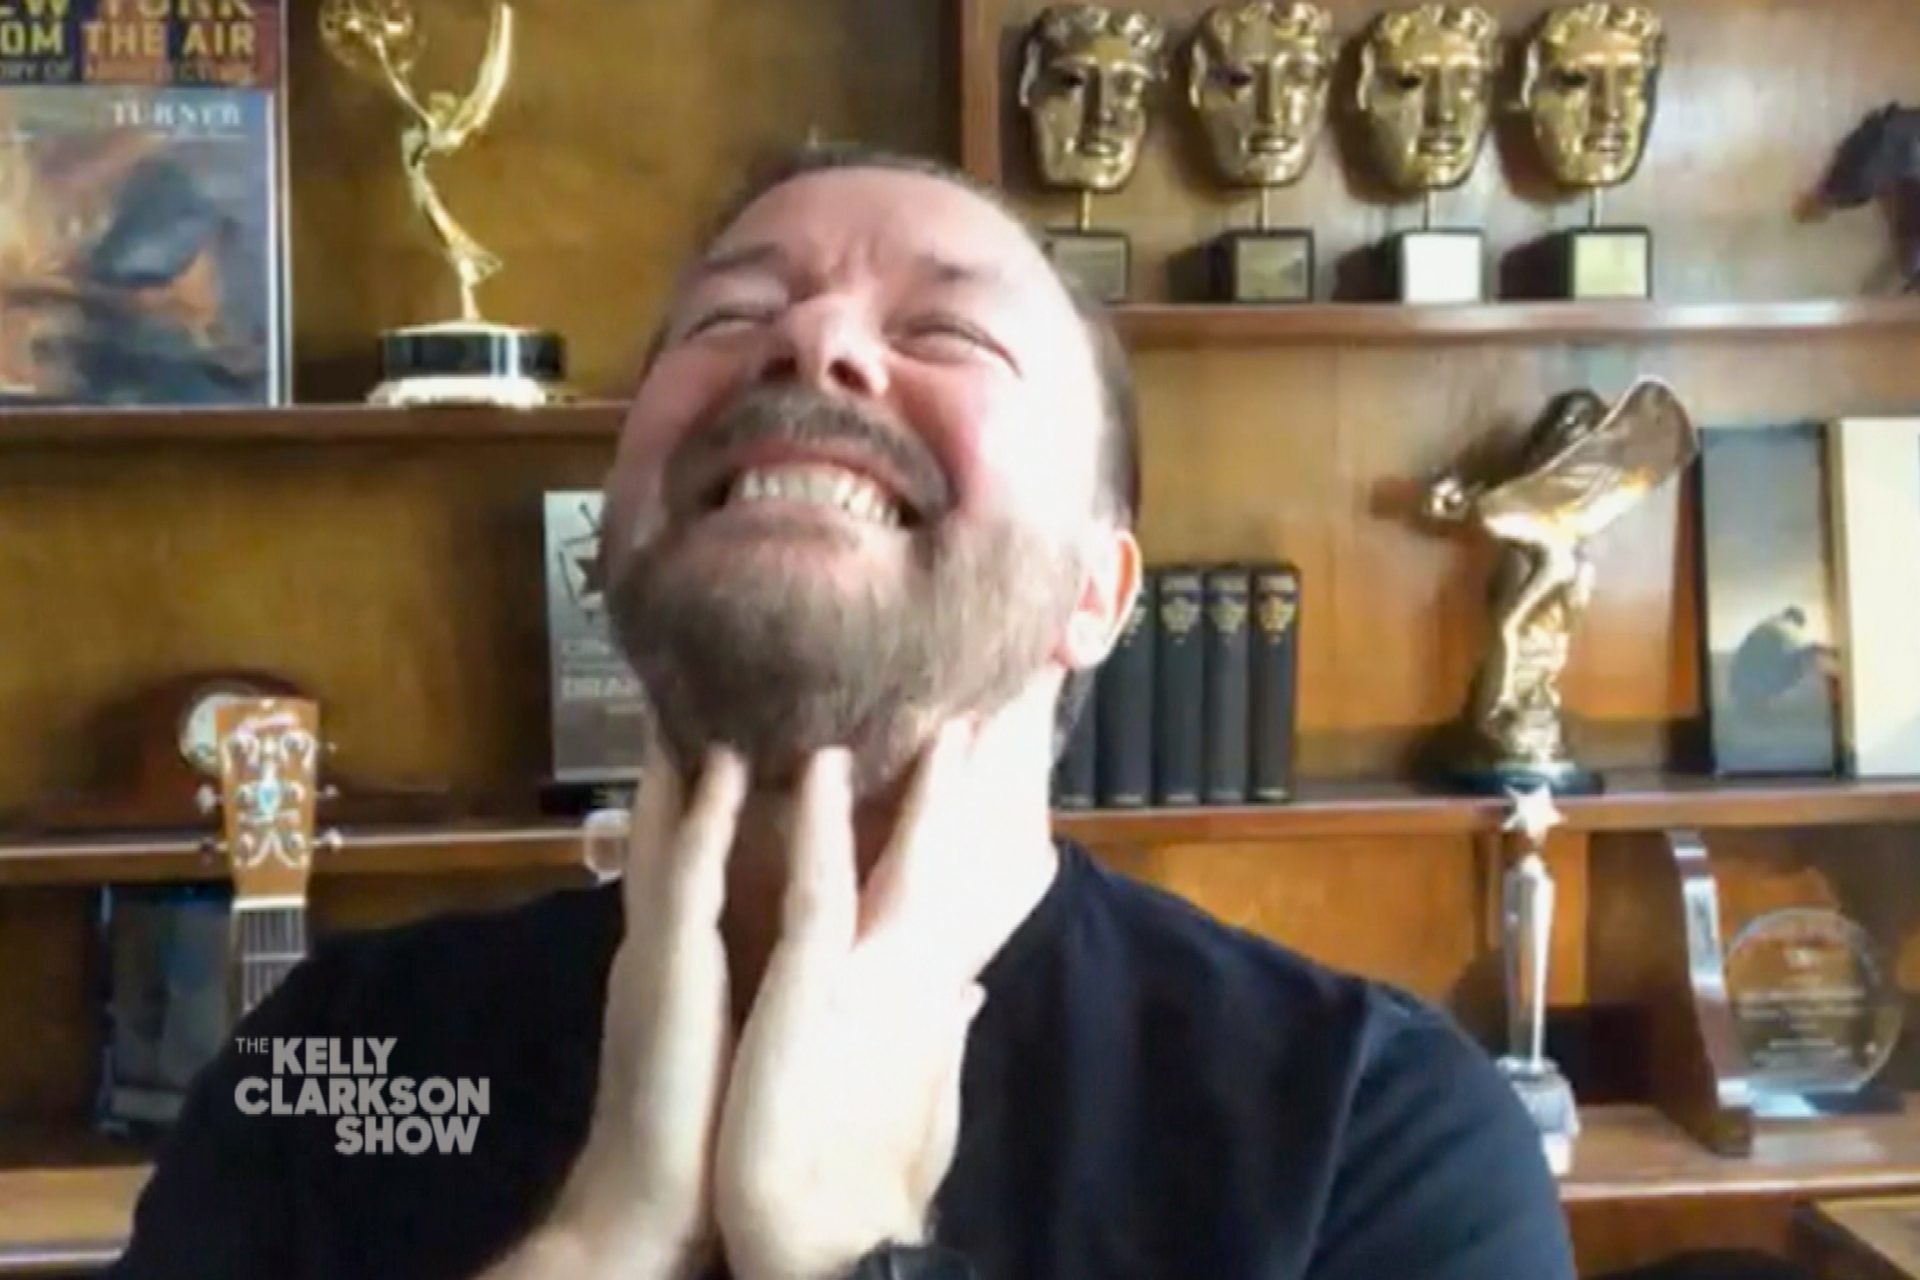 Two Ricky Gervais appearances